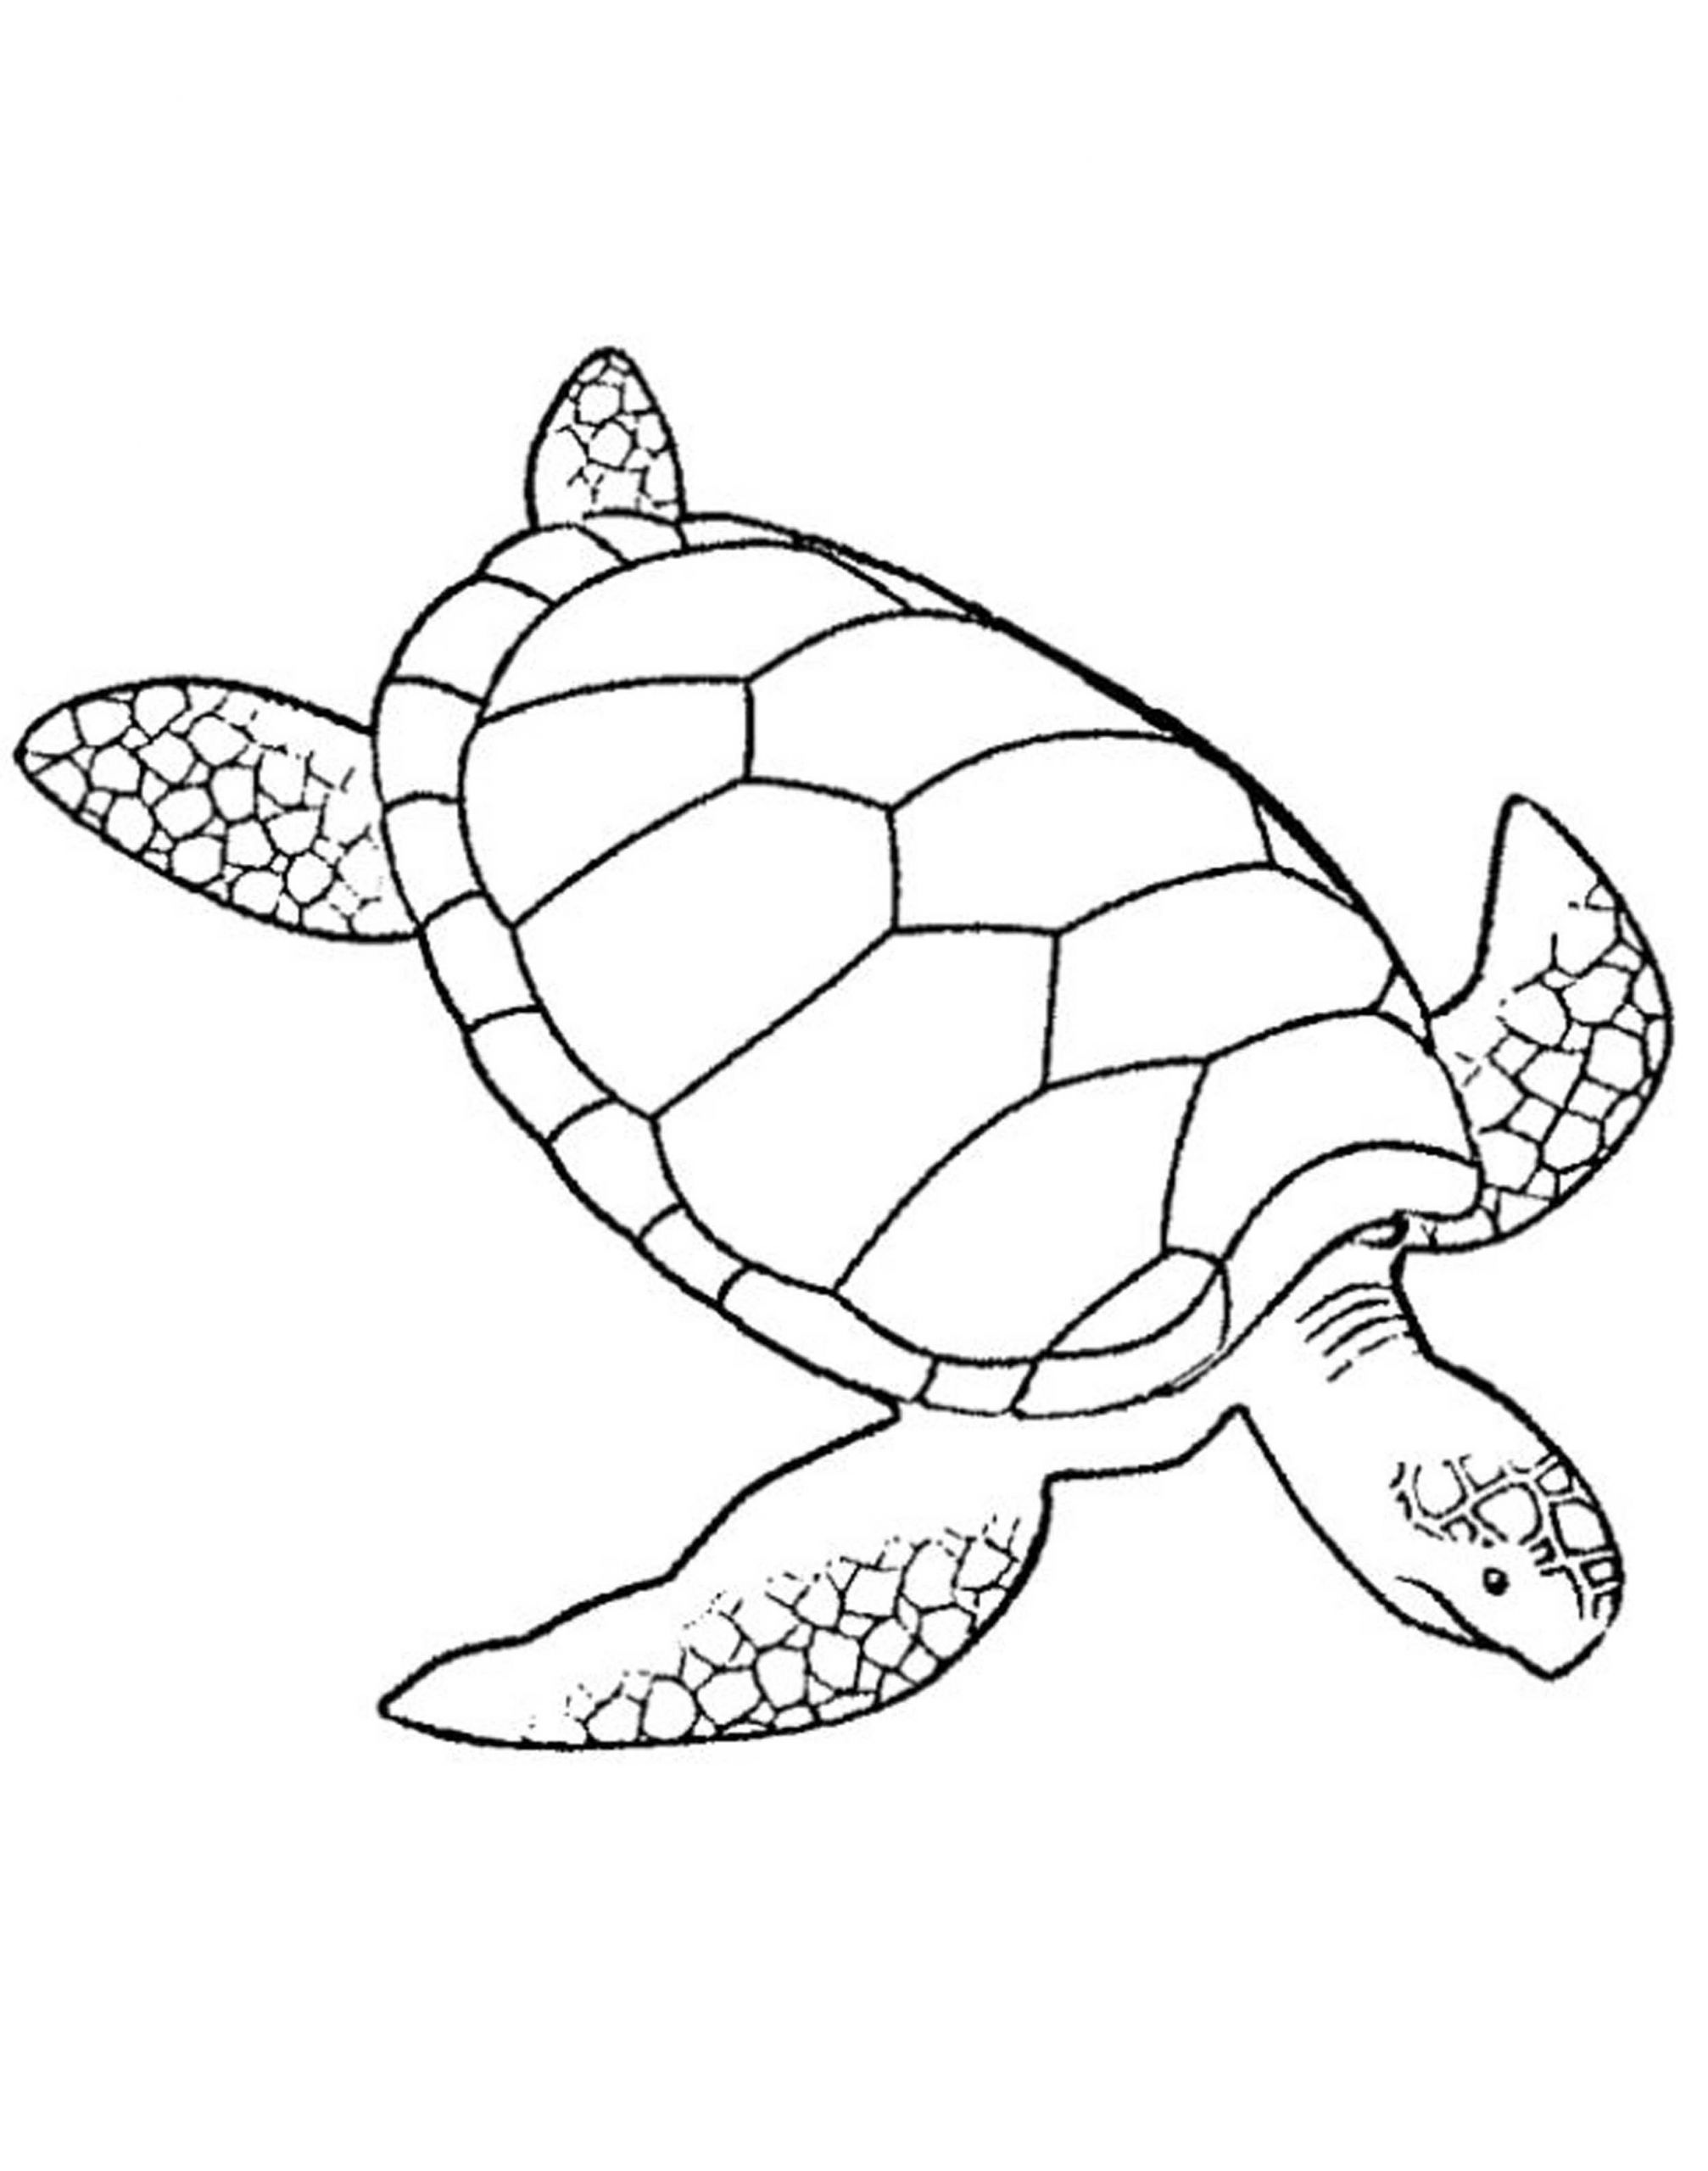 Turtle Coloring Pages For Kids
 ADULT COLORING PAGES TURTLE Coloring Home